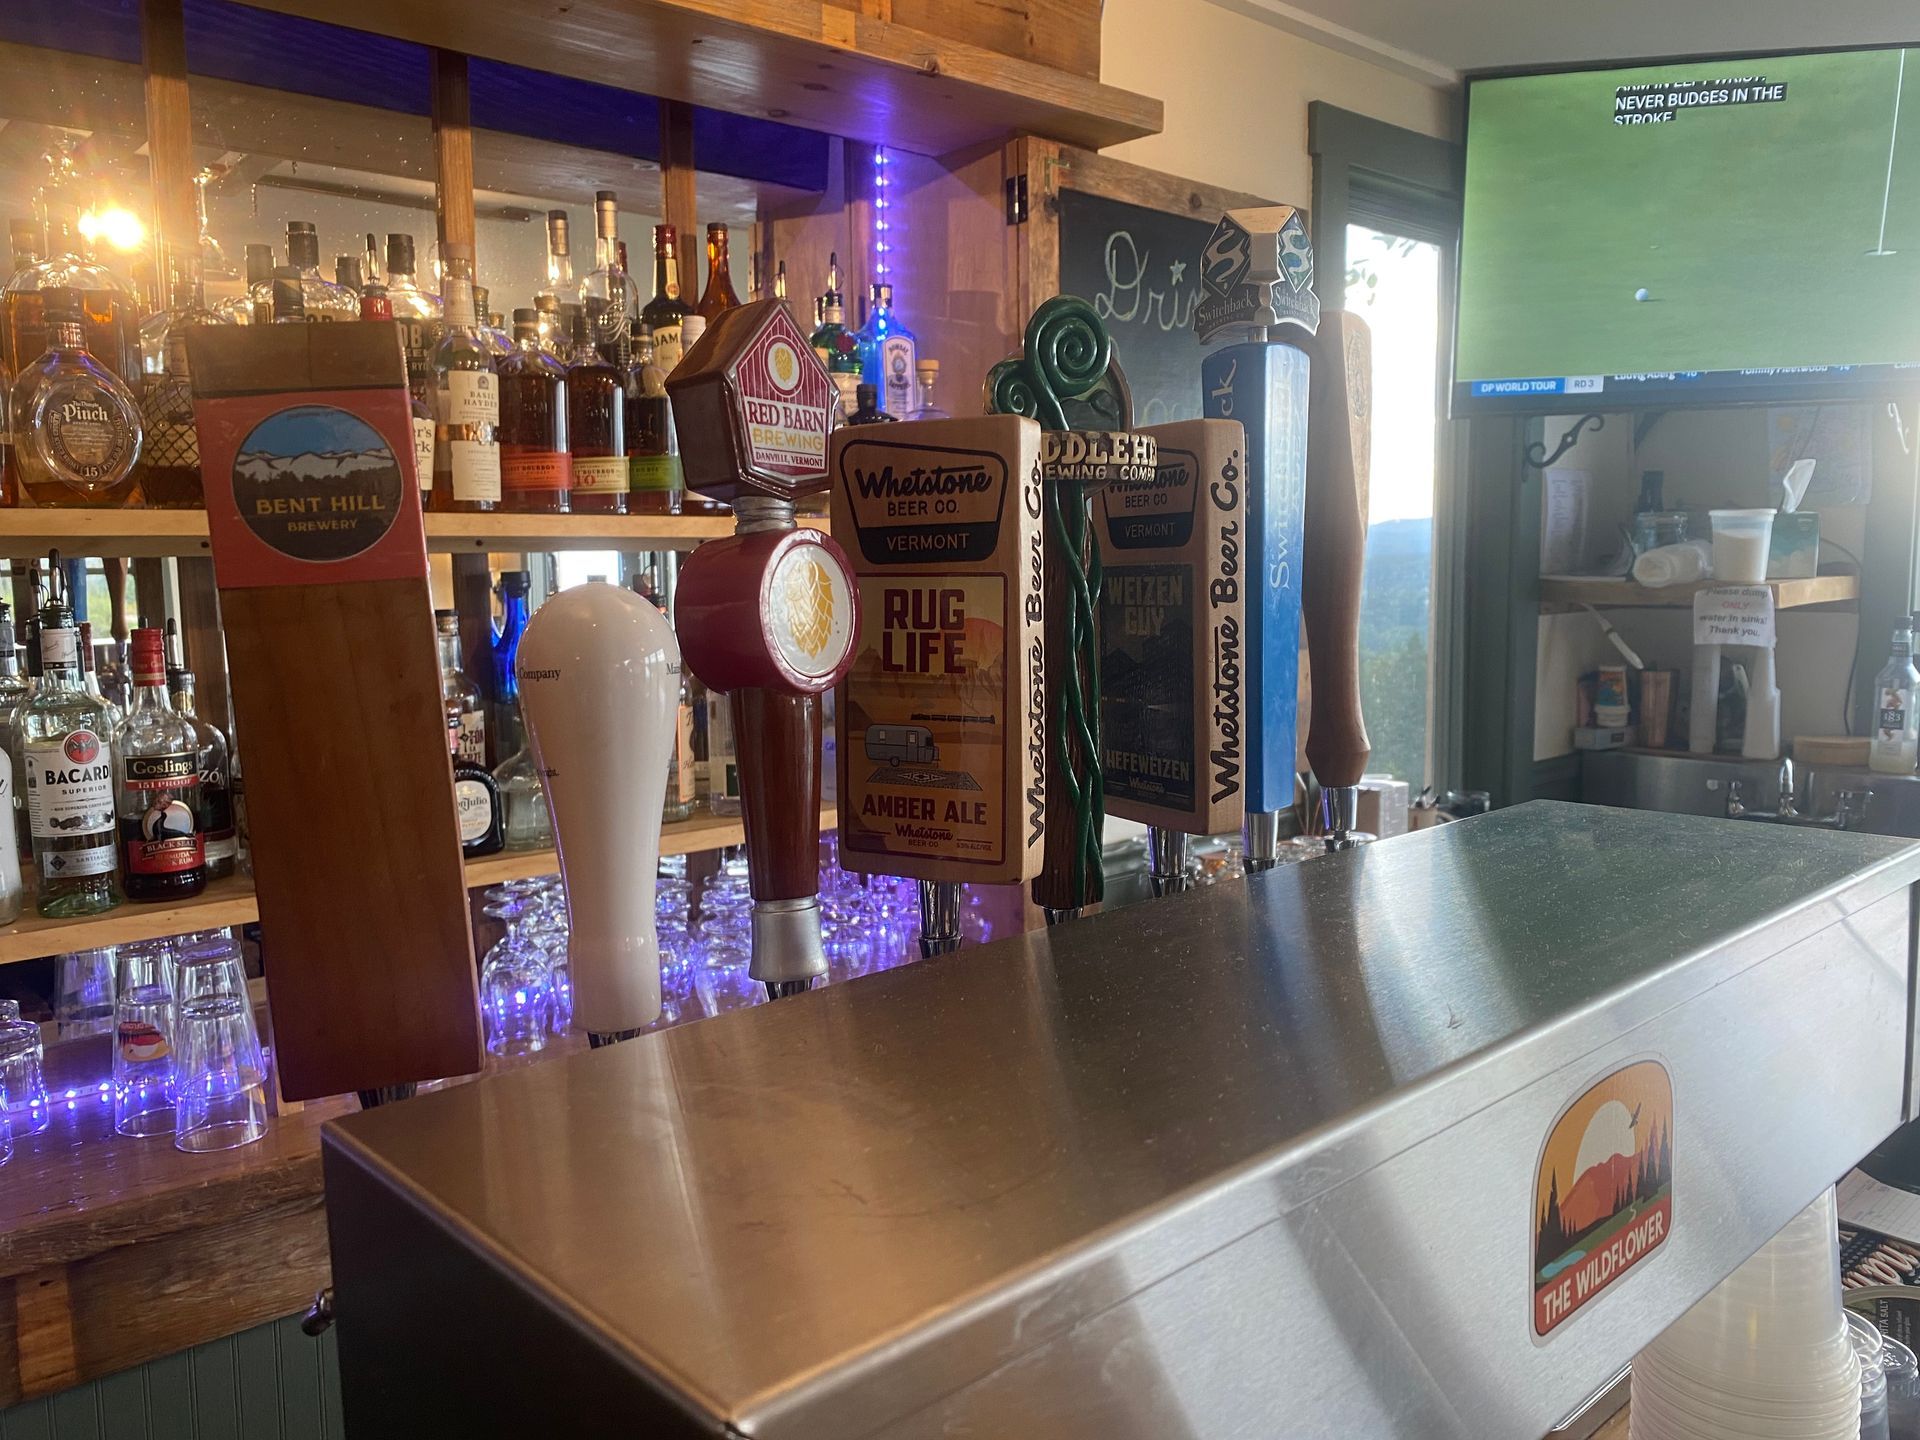 Close up of The Wildflower's bar and beer taps with various local brewers on tap.